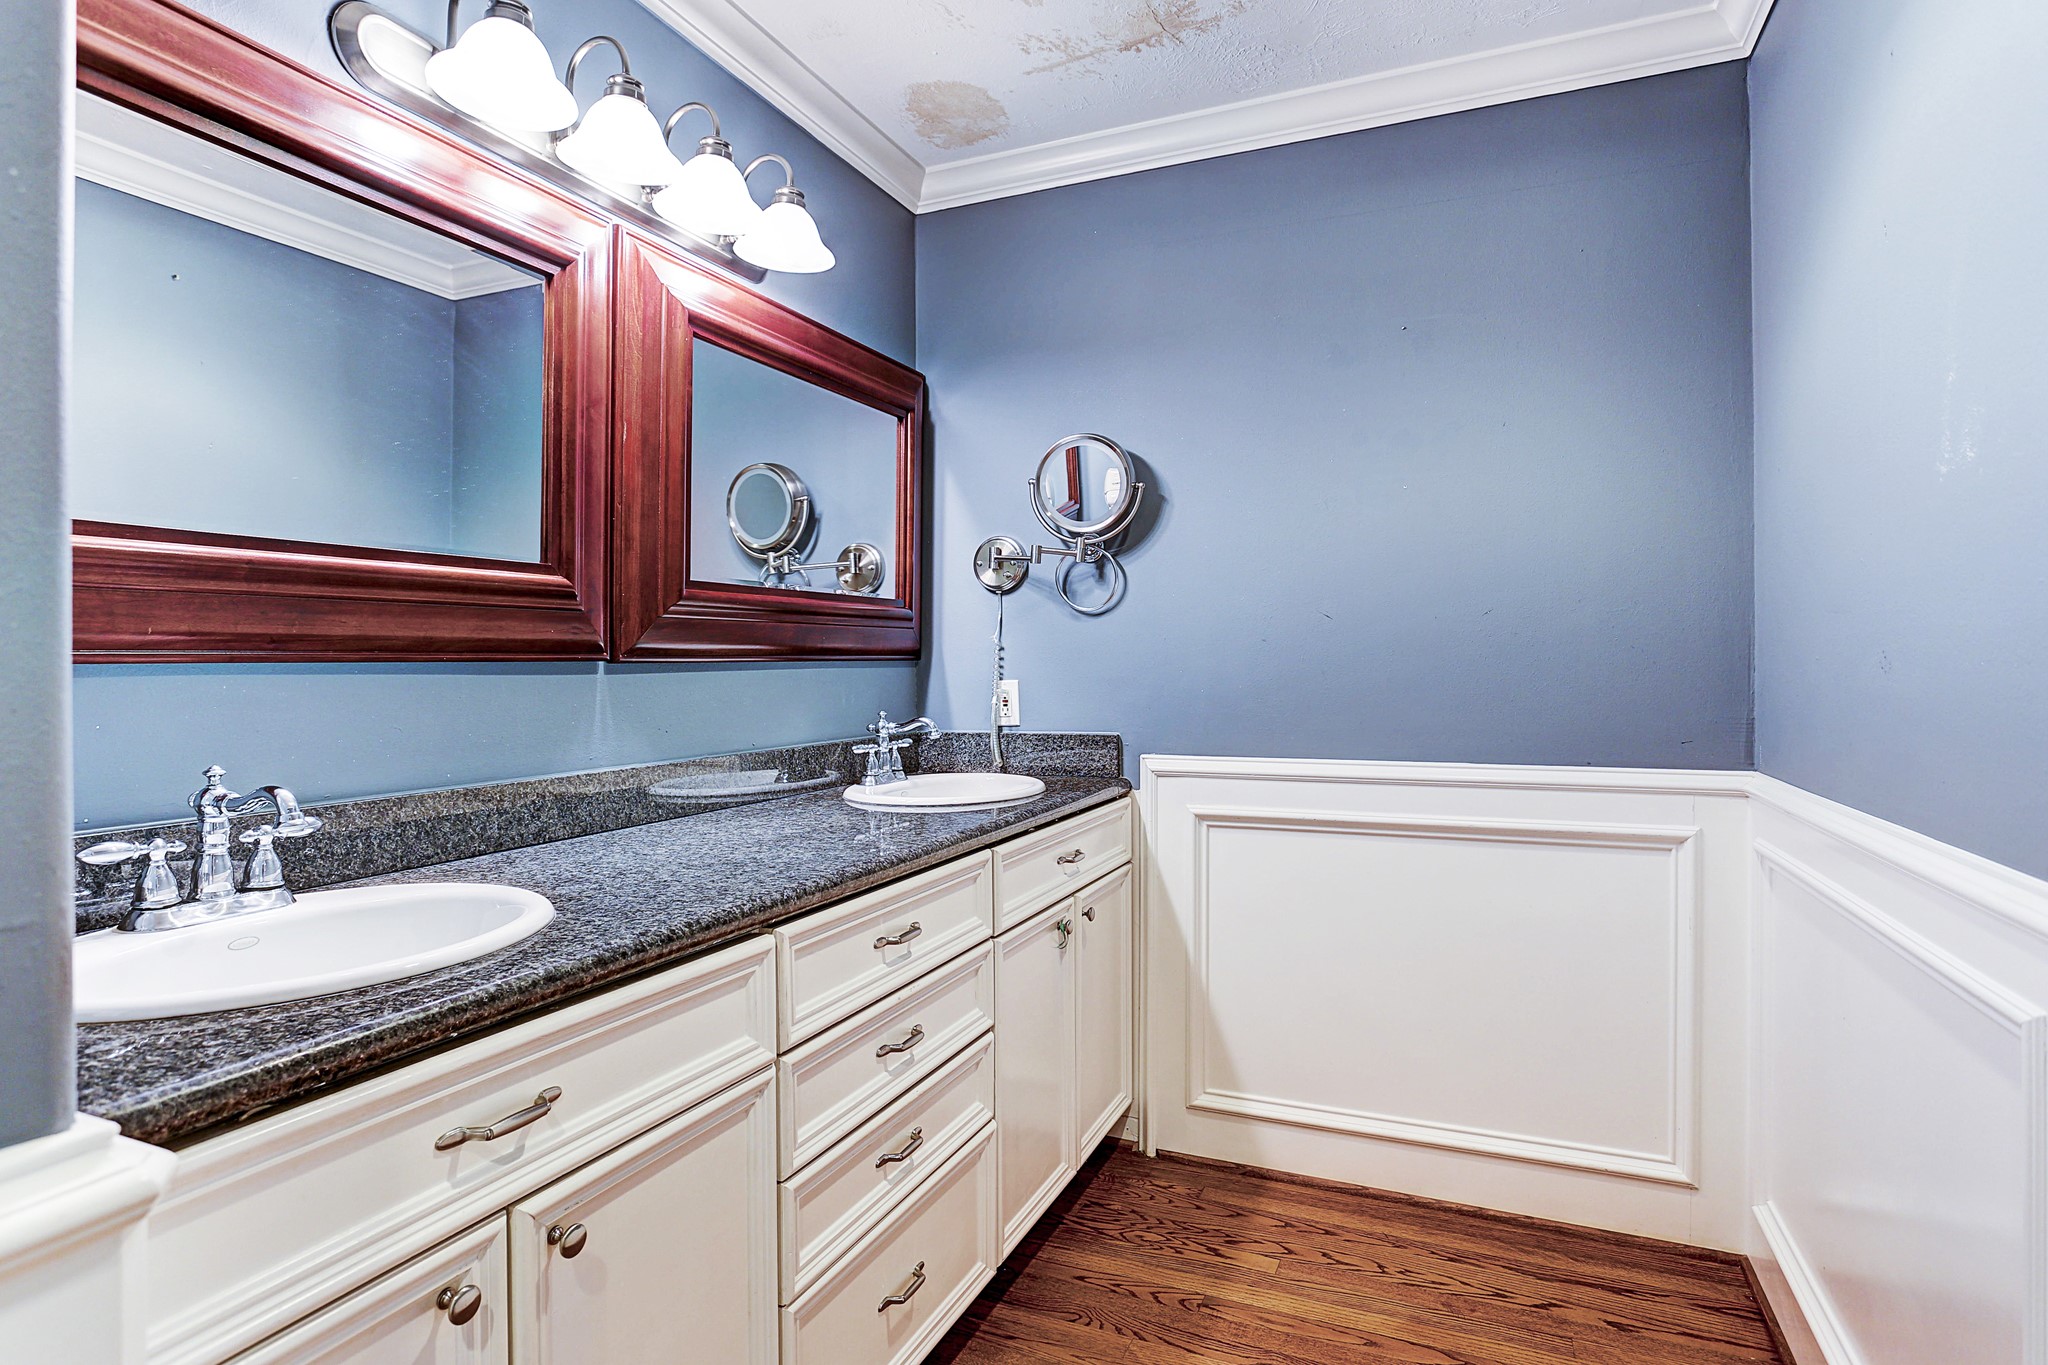 Double sinks and built-ins dress up the primary bathroom.